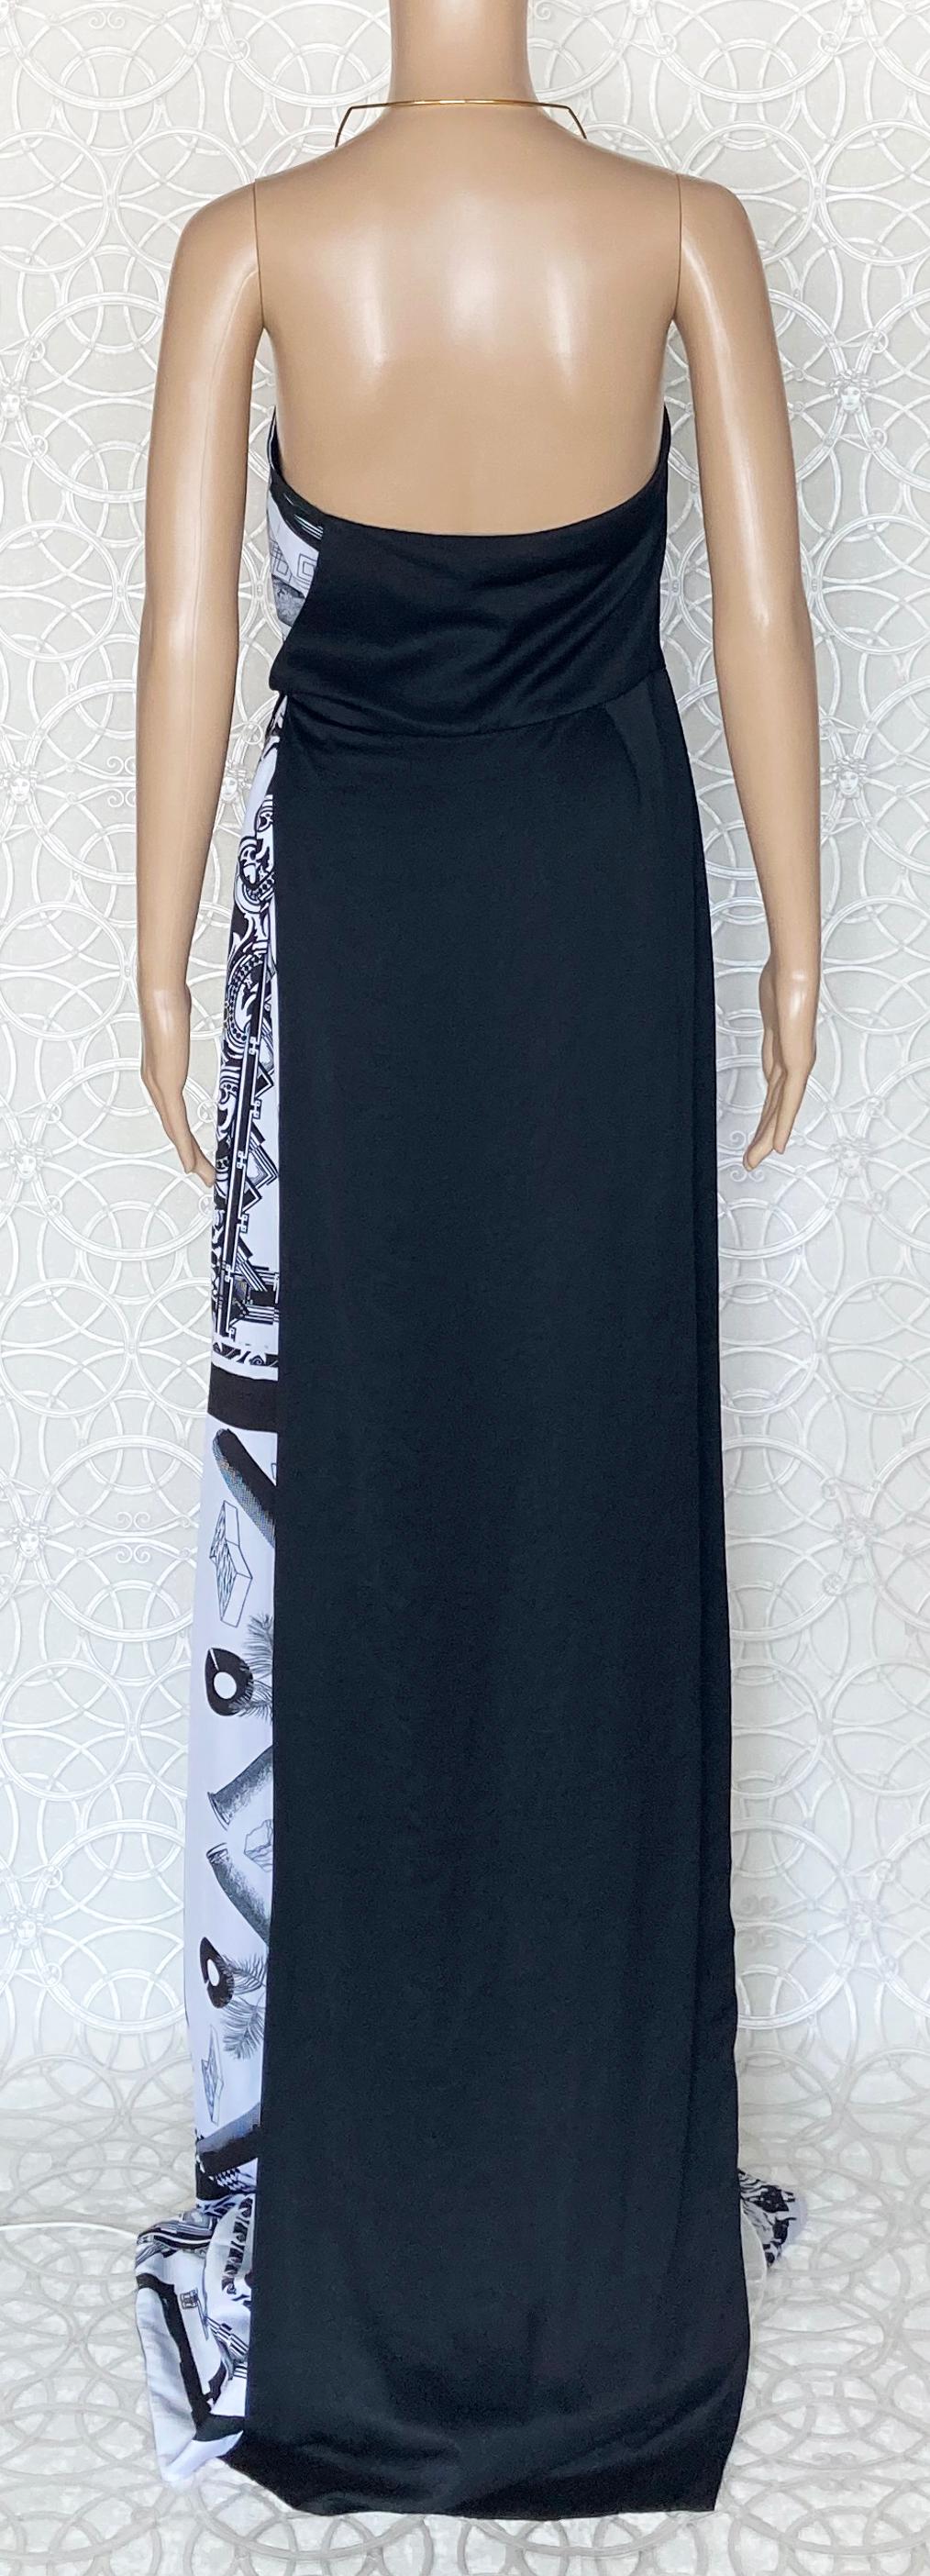 Versace VERSUS + Anthony Vaccarello iconic print maxi dress 38 - 2, 42 - 6 For Sale 6